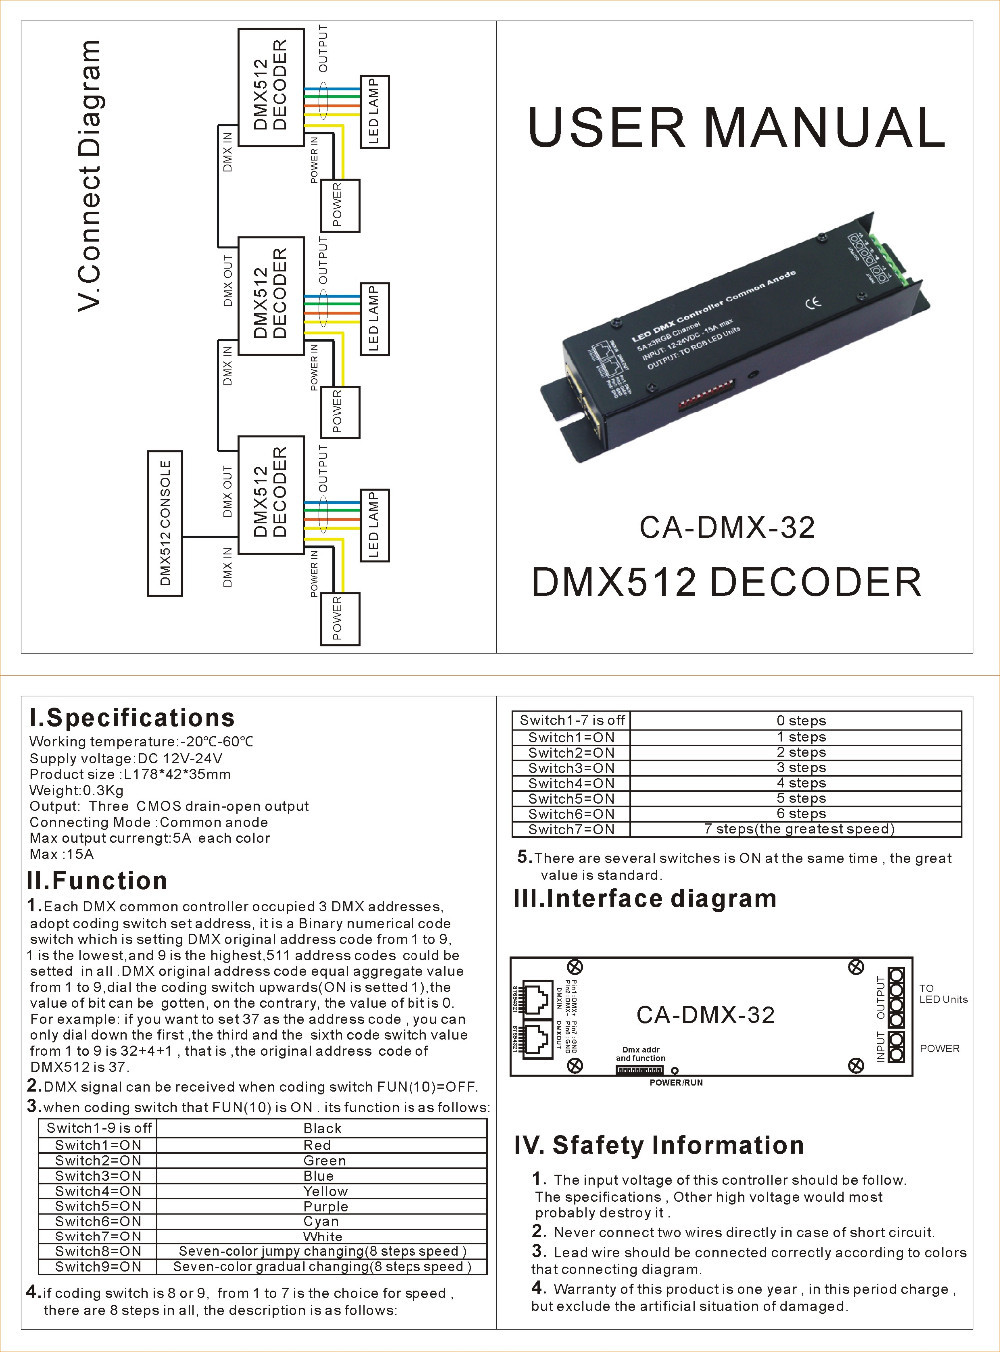 DMX_Controllers_and_Decoders_CA_DMX_32_2